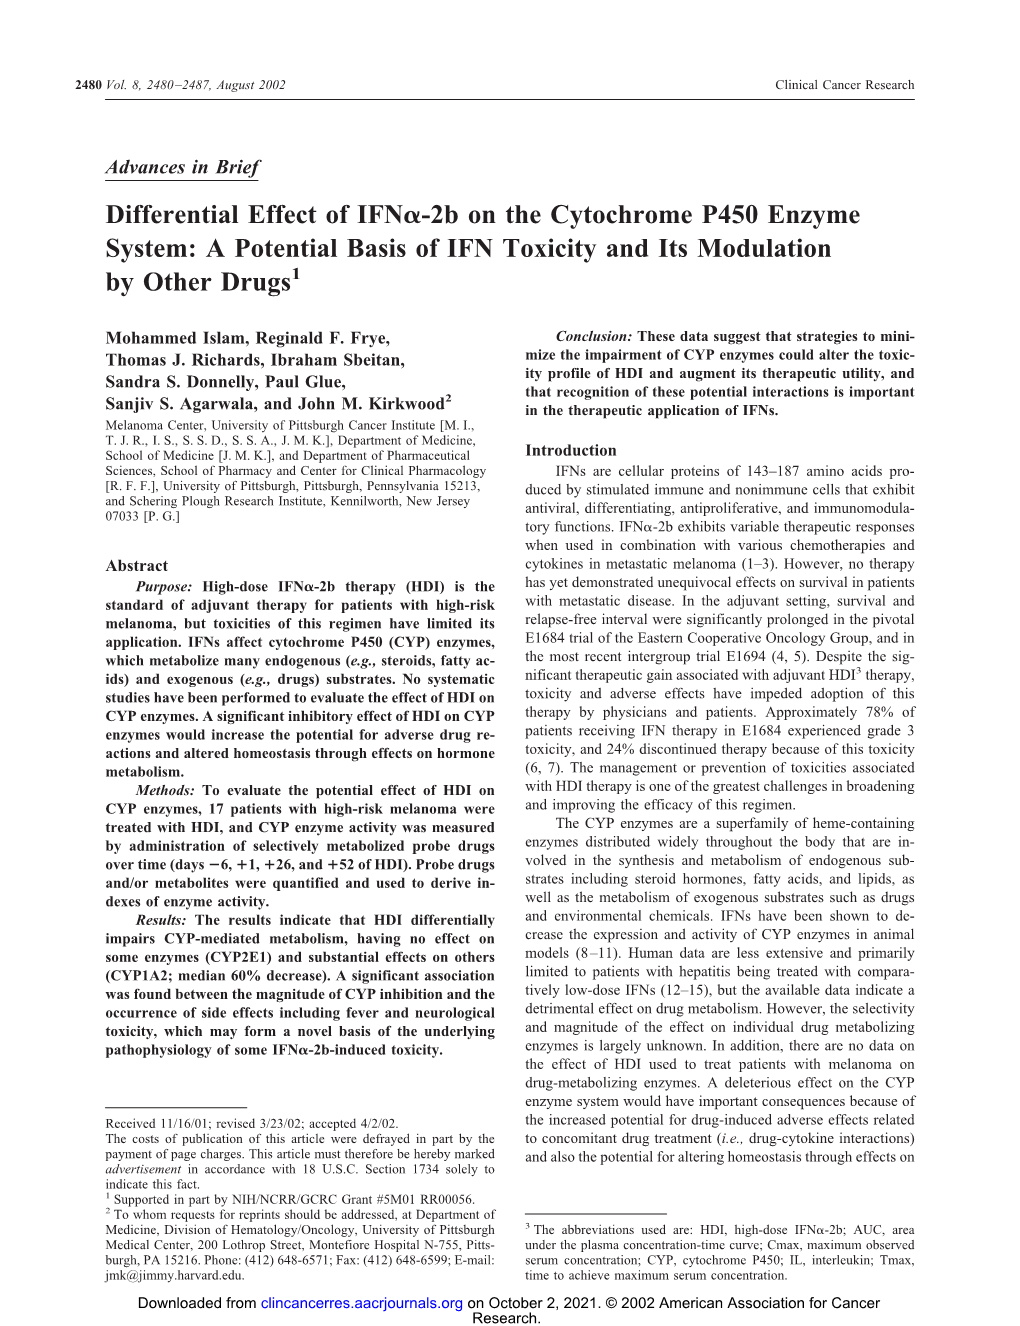 Differential Effect of IFN -2B on the Cytochrome P450 Enzyme System